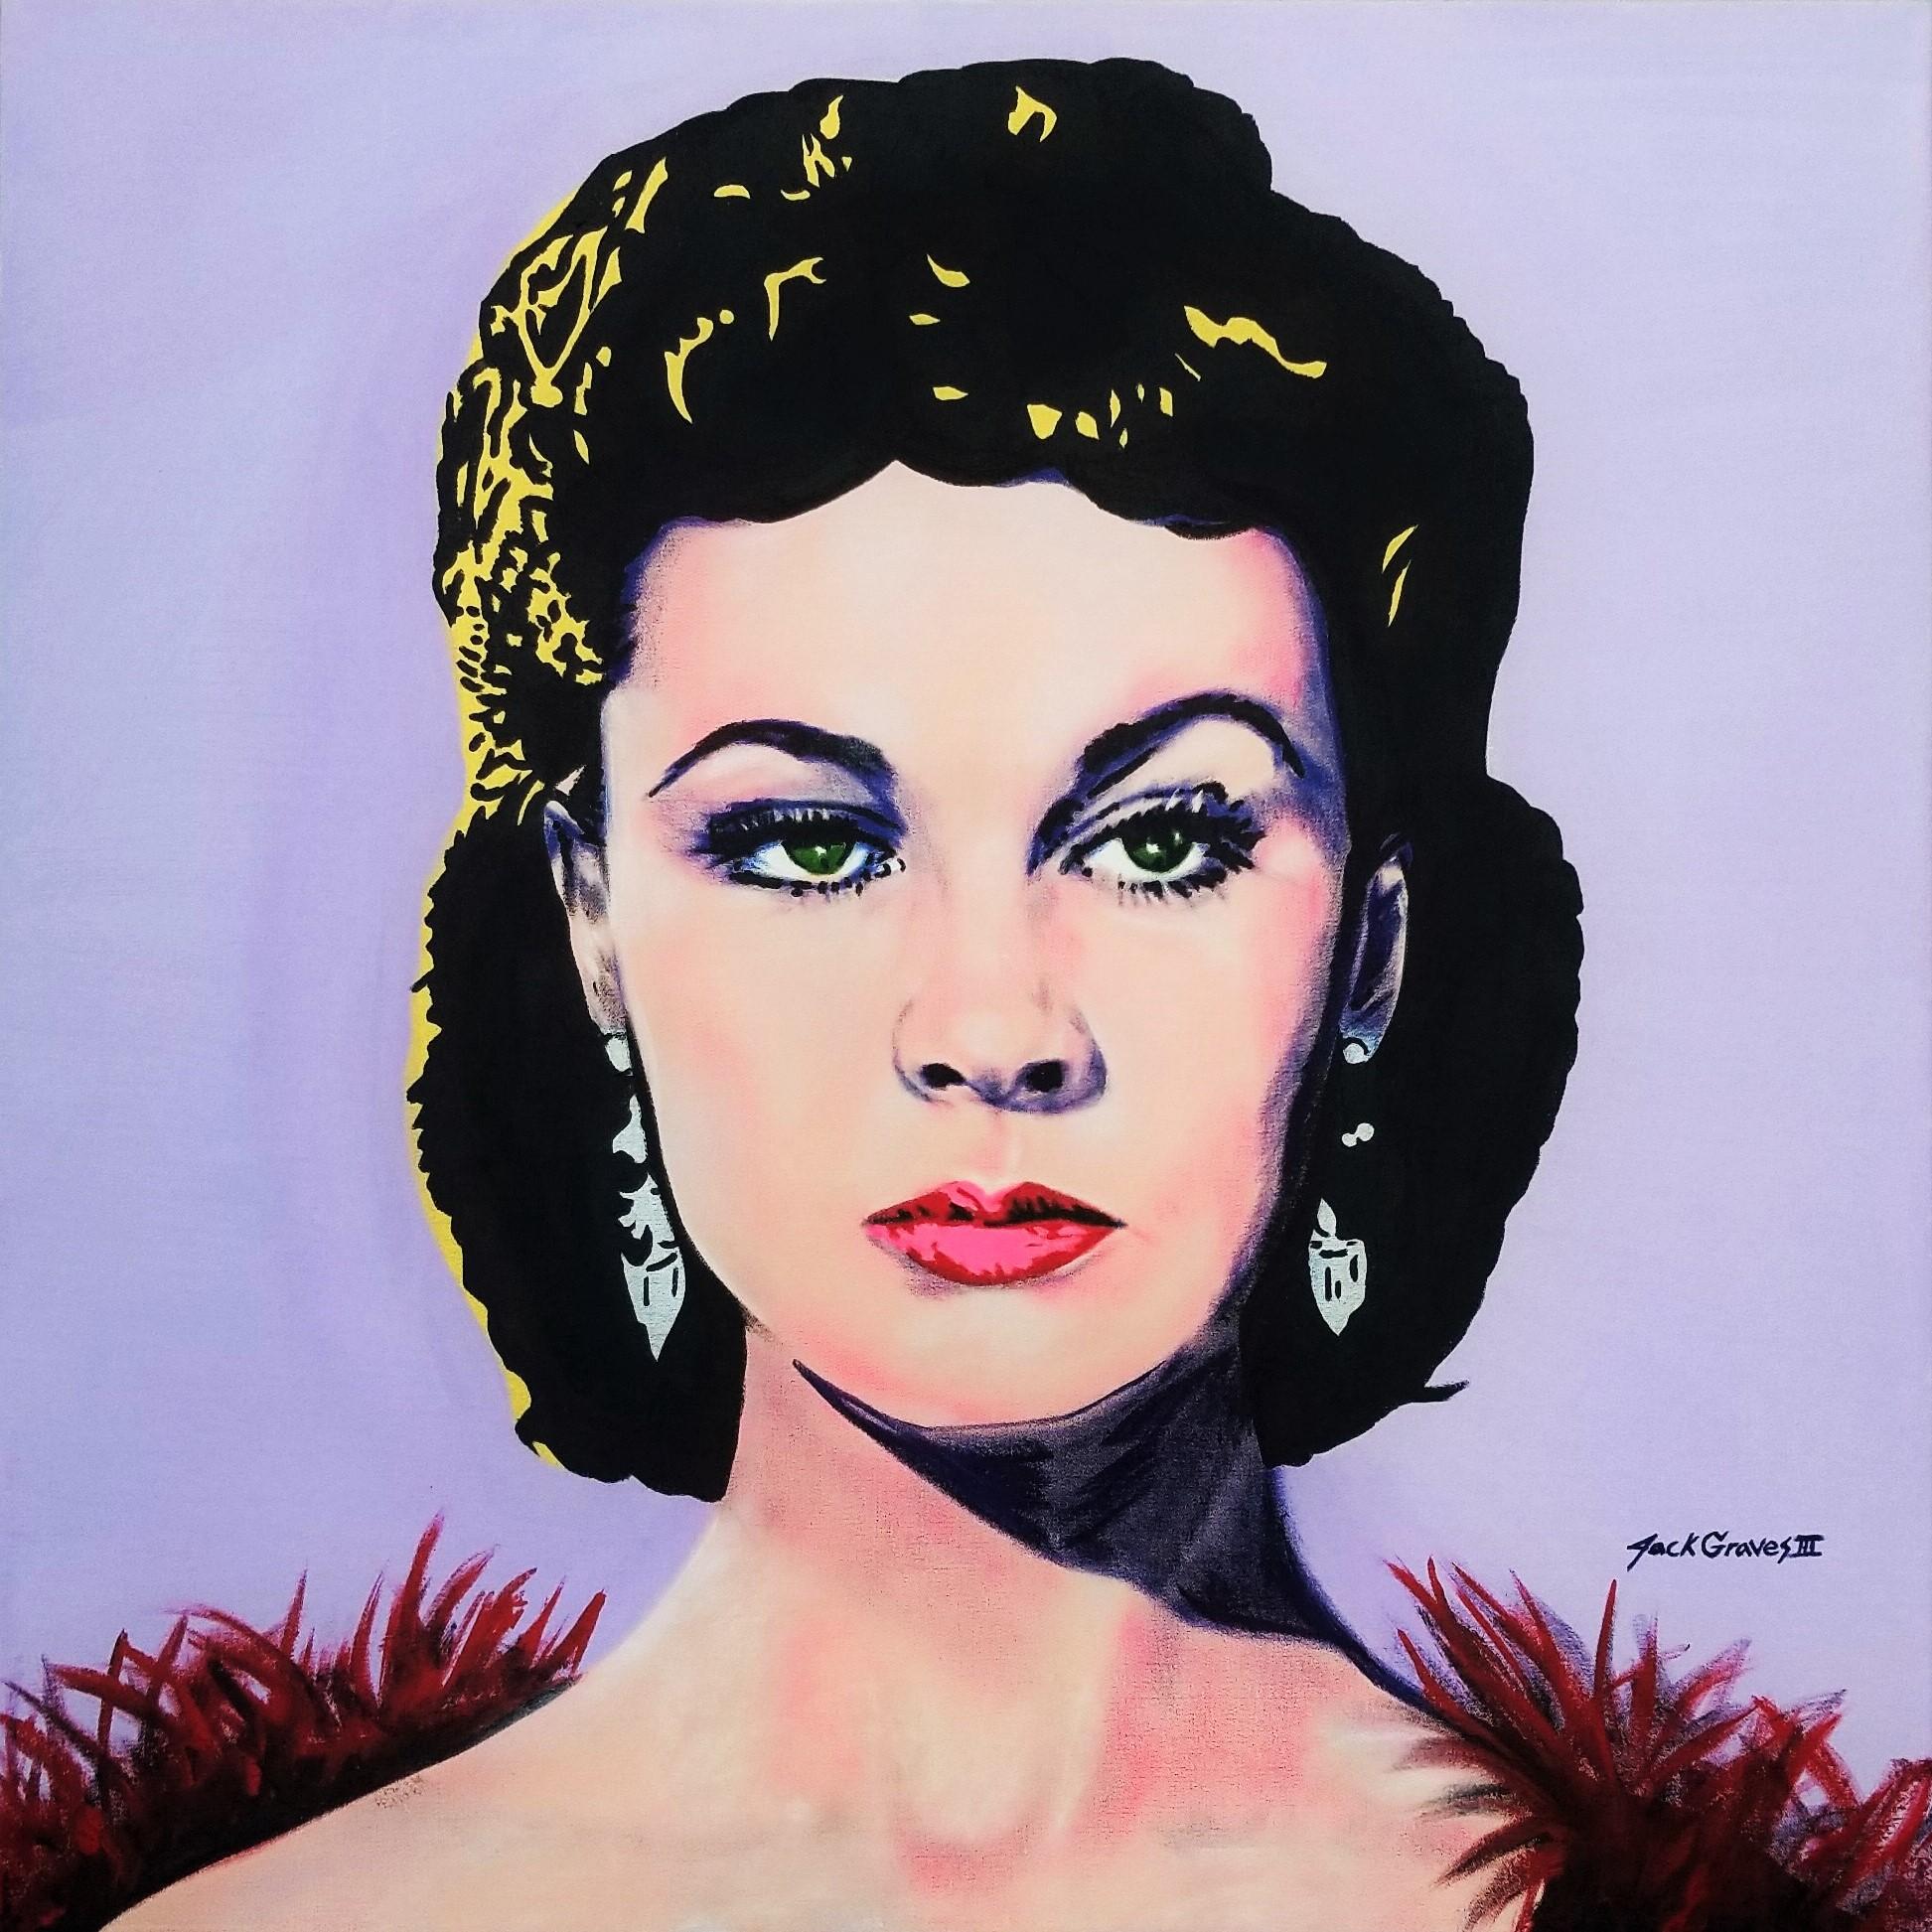 Jack Graves III Portrait Painting - Scarlett O'Hara Icon II (Vivien Leigh) /// Contemporary Pop Art Painting Actress